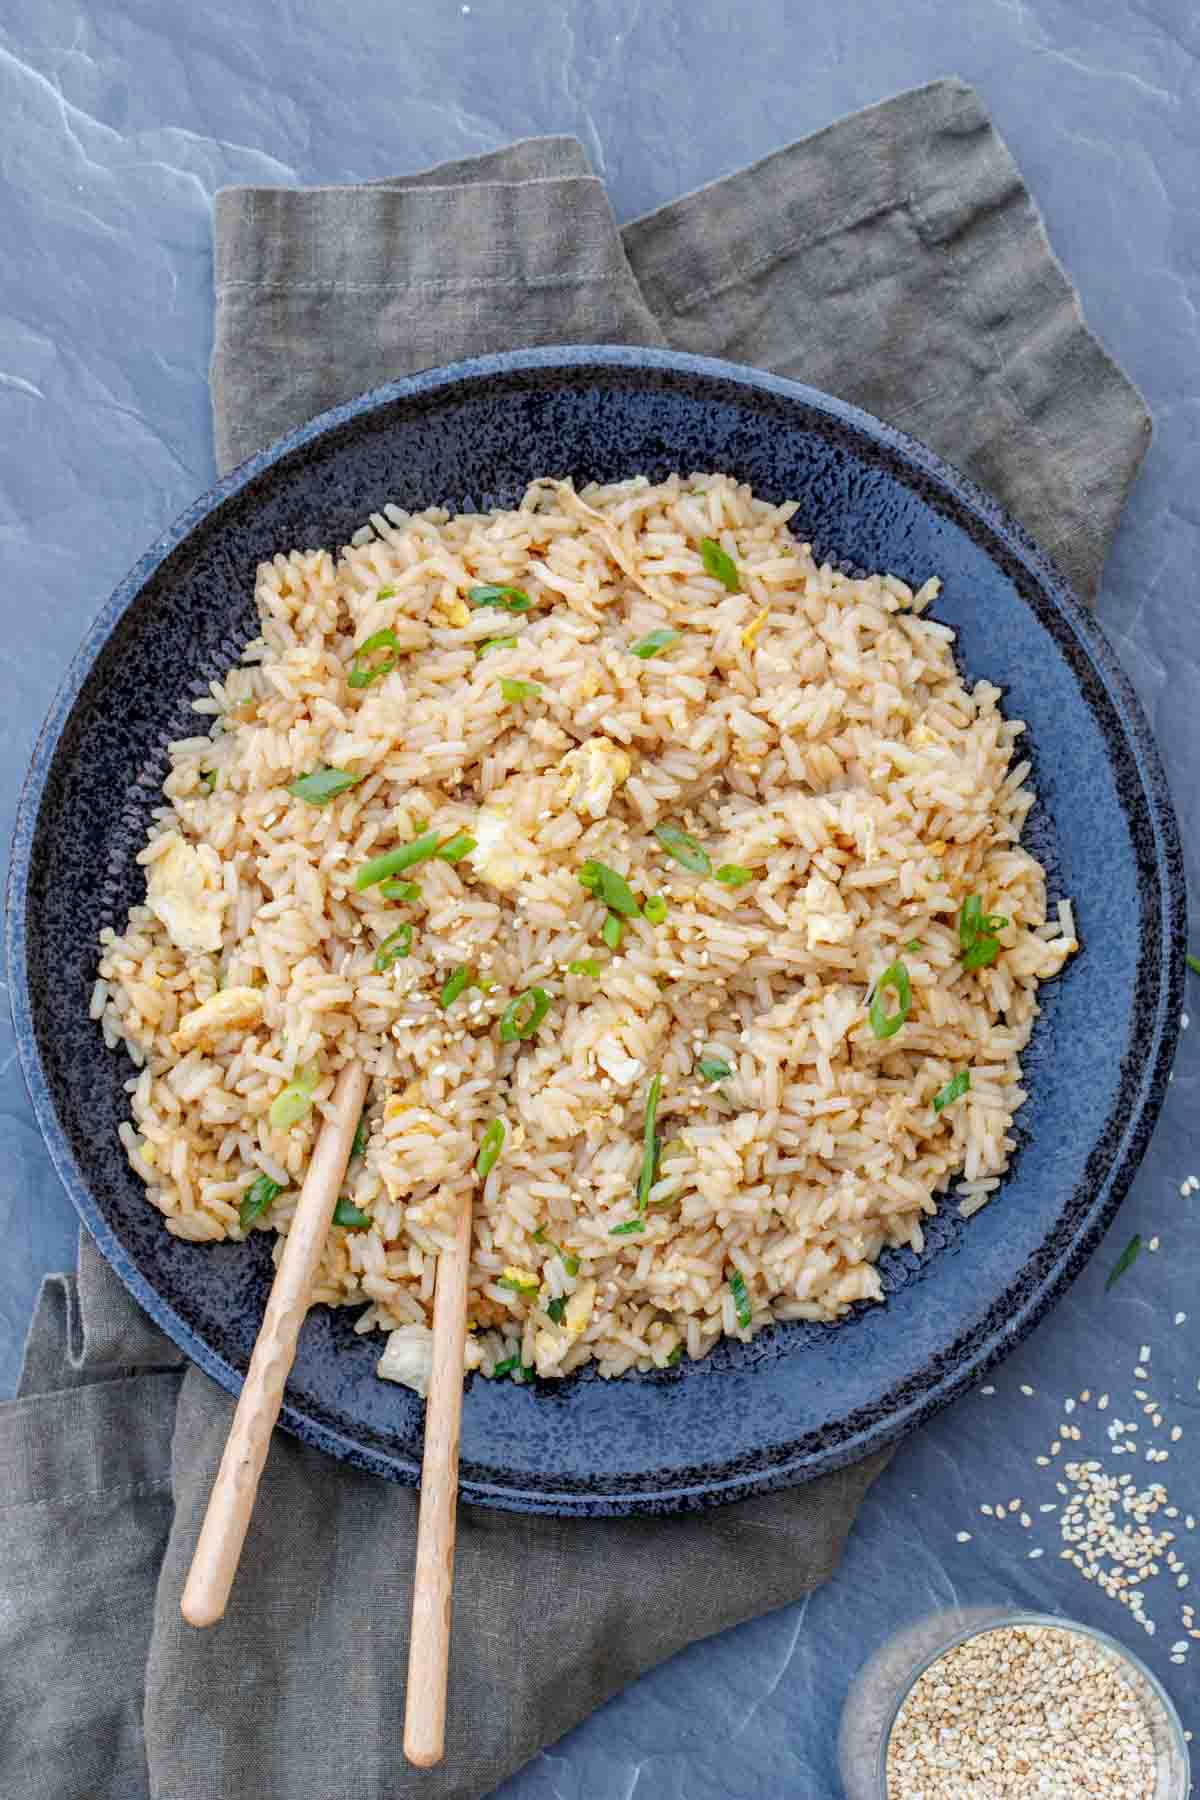 Hibachi rice with with a serving napkin and semame seeds.